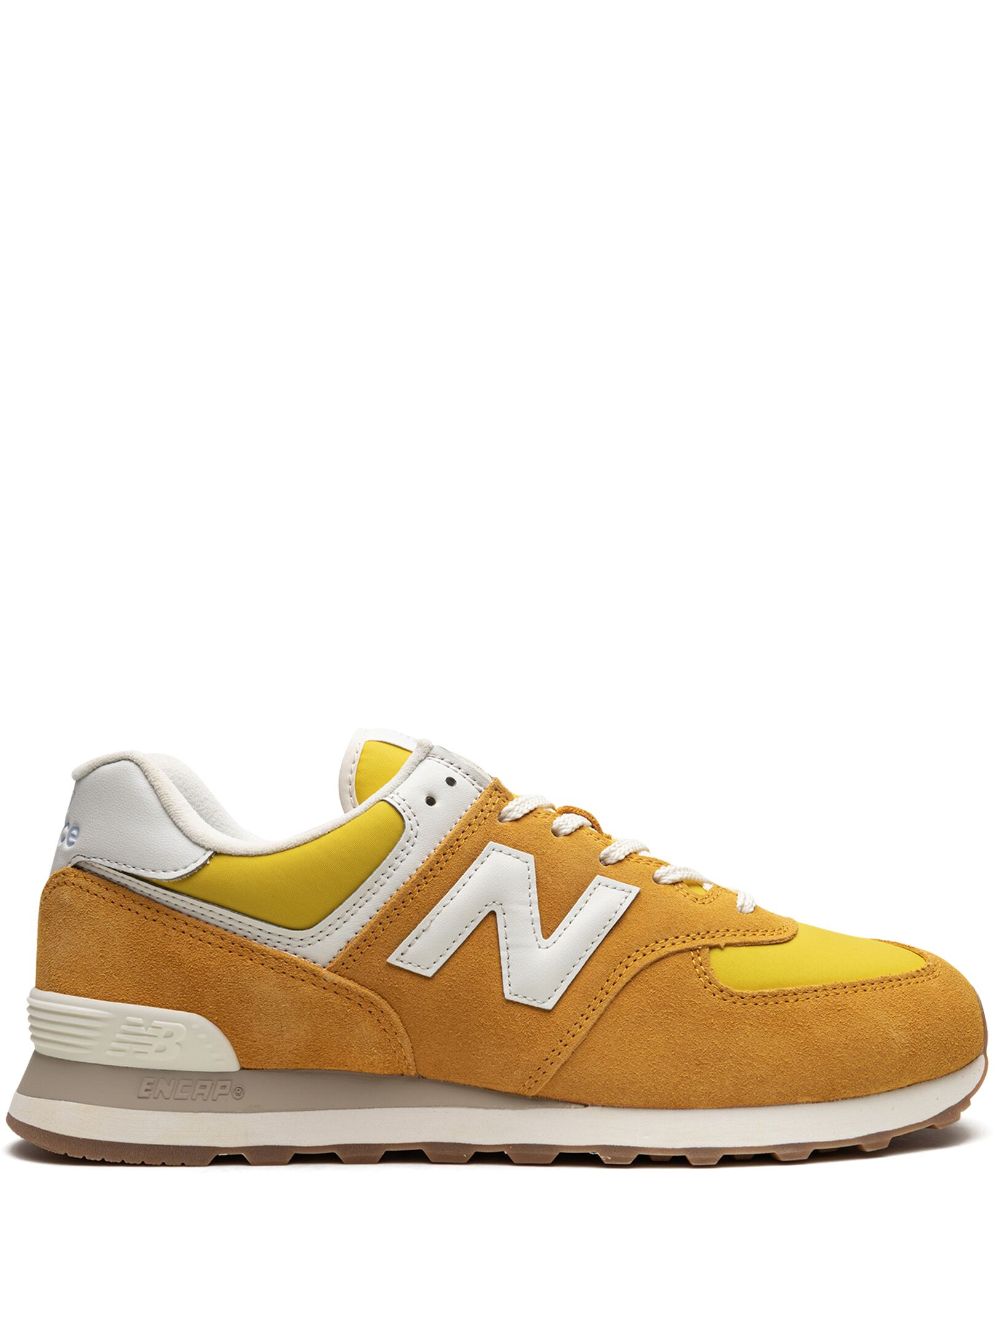 New Balance 574 low-top sneakers - Yellow